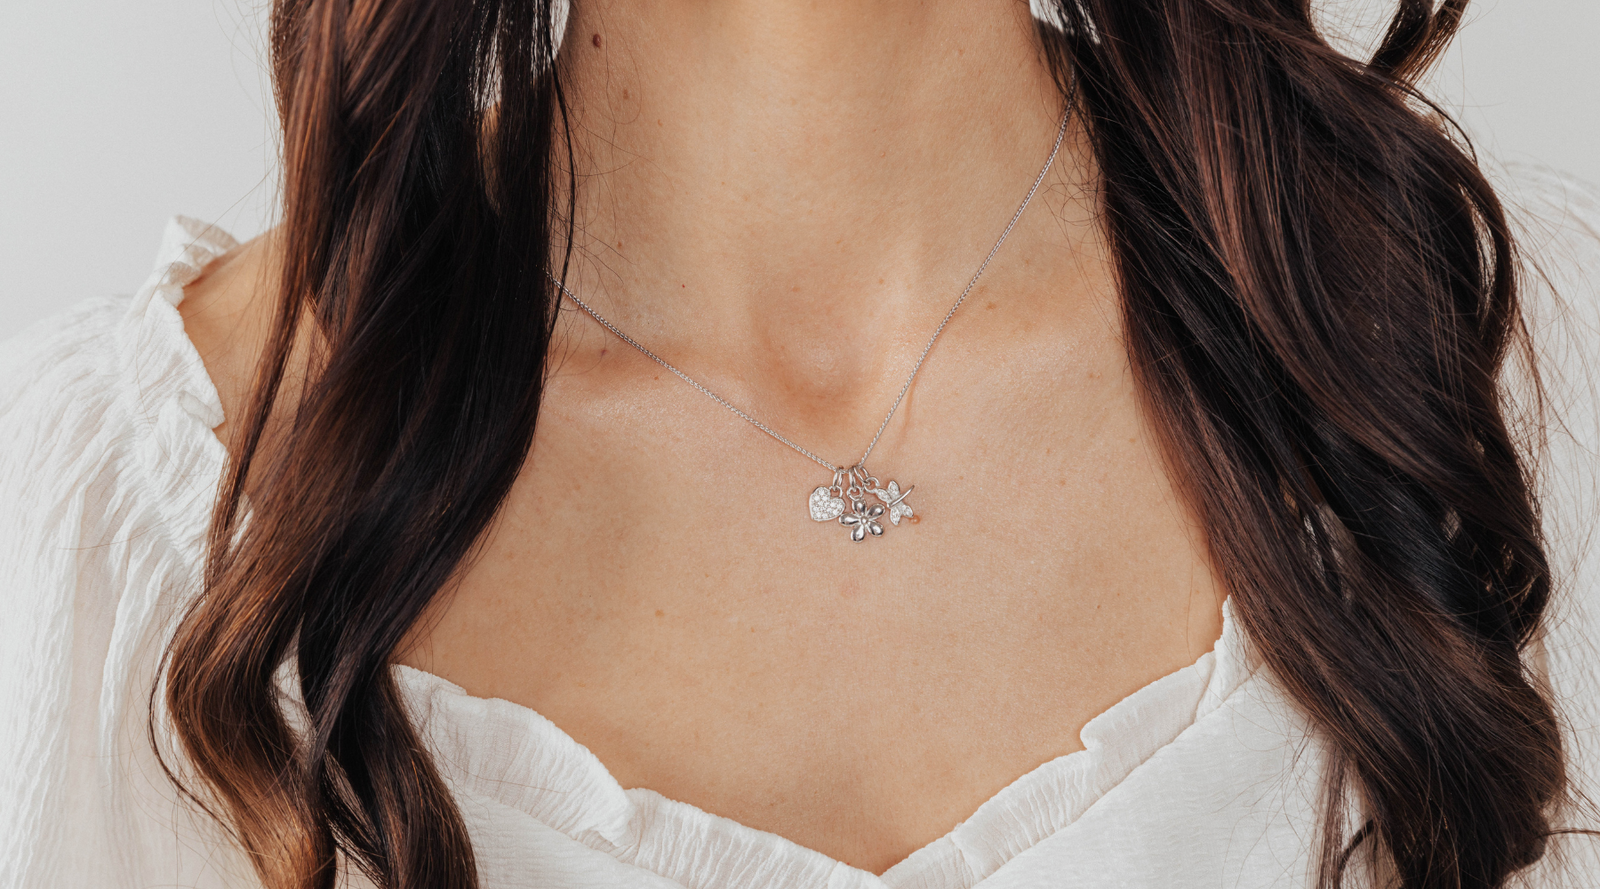 Caring for CZ Jewelry: Does Cubic Zirconia Tarnish?